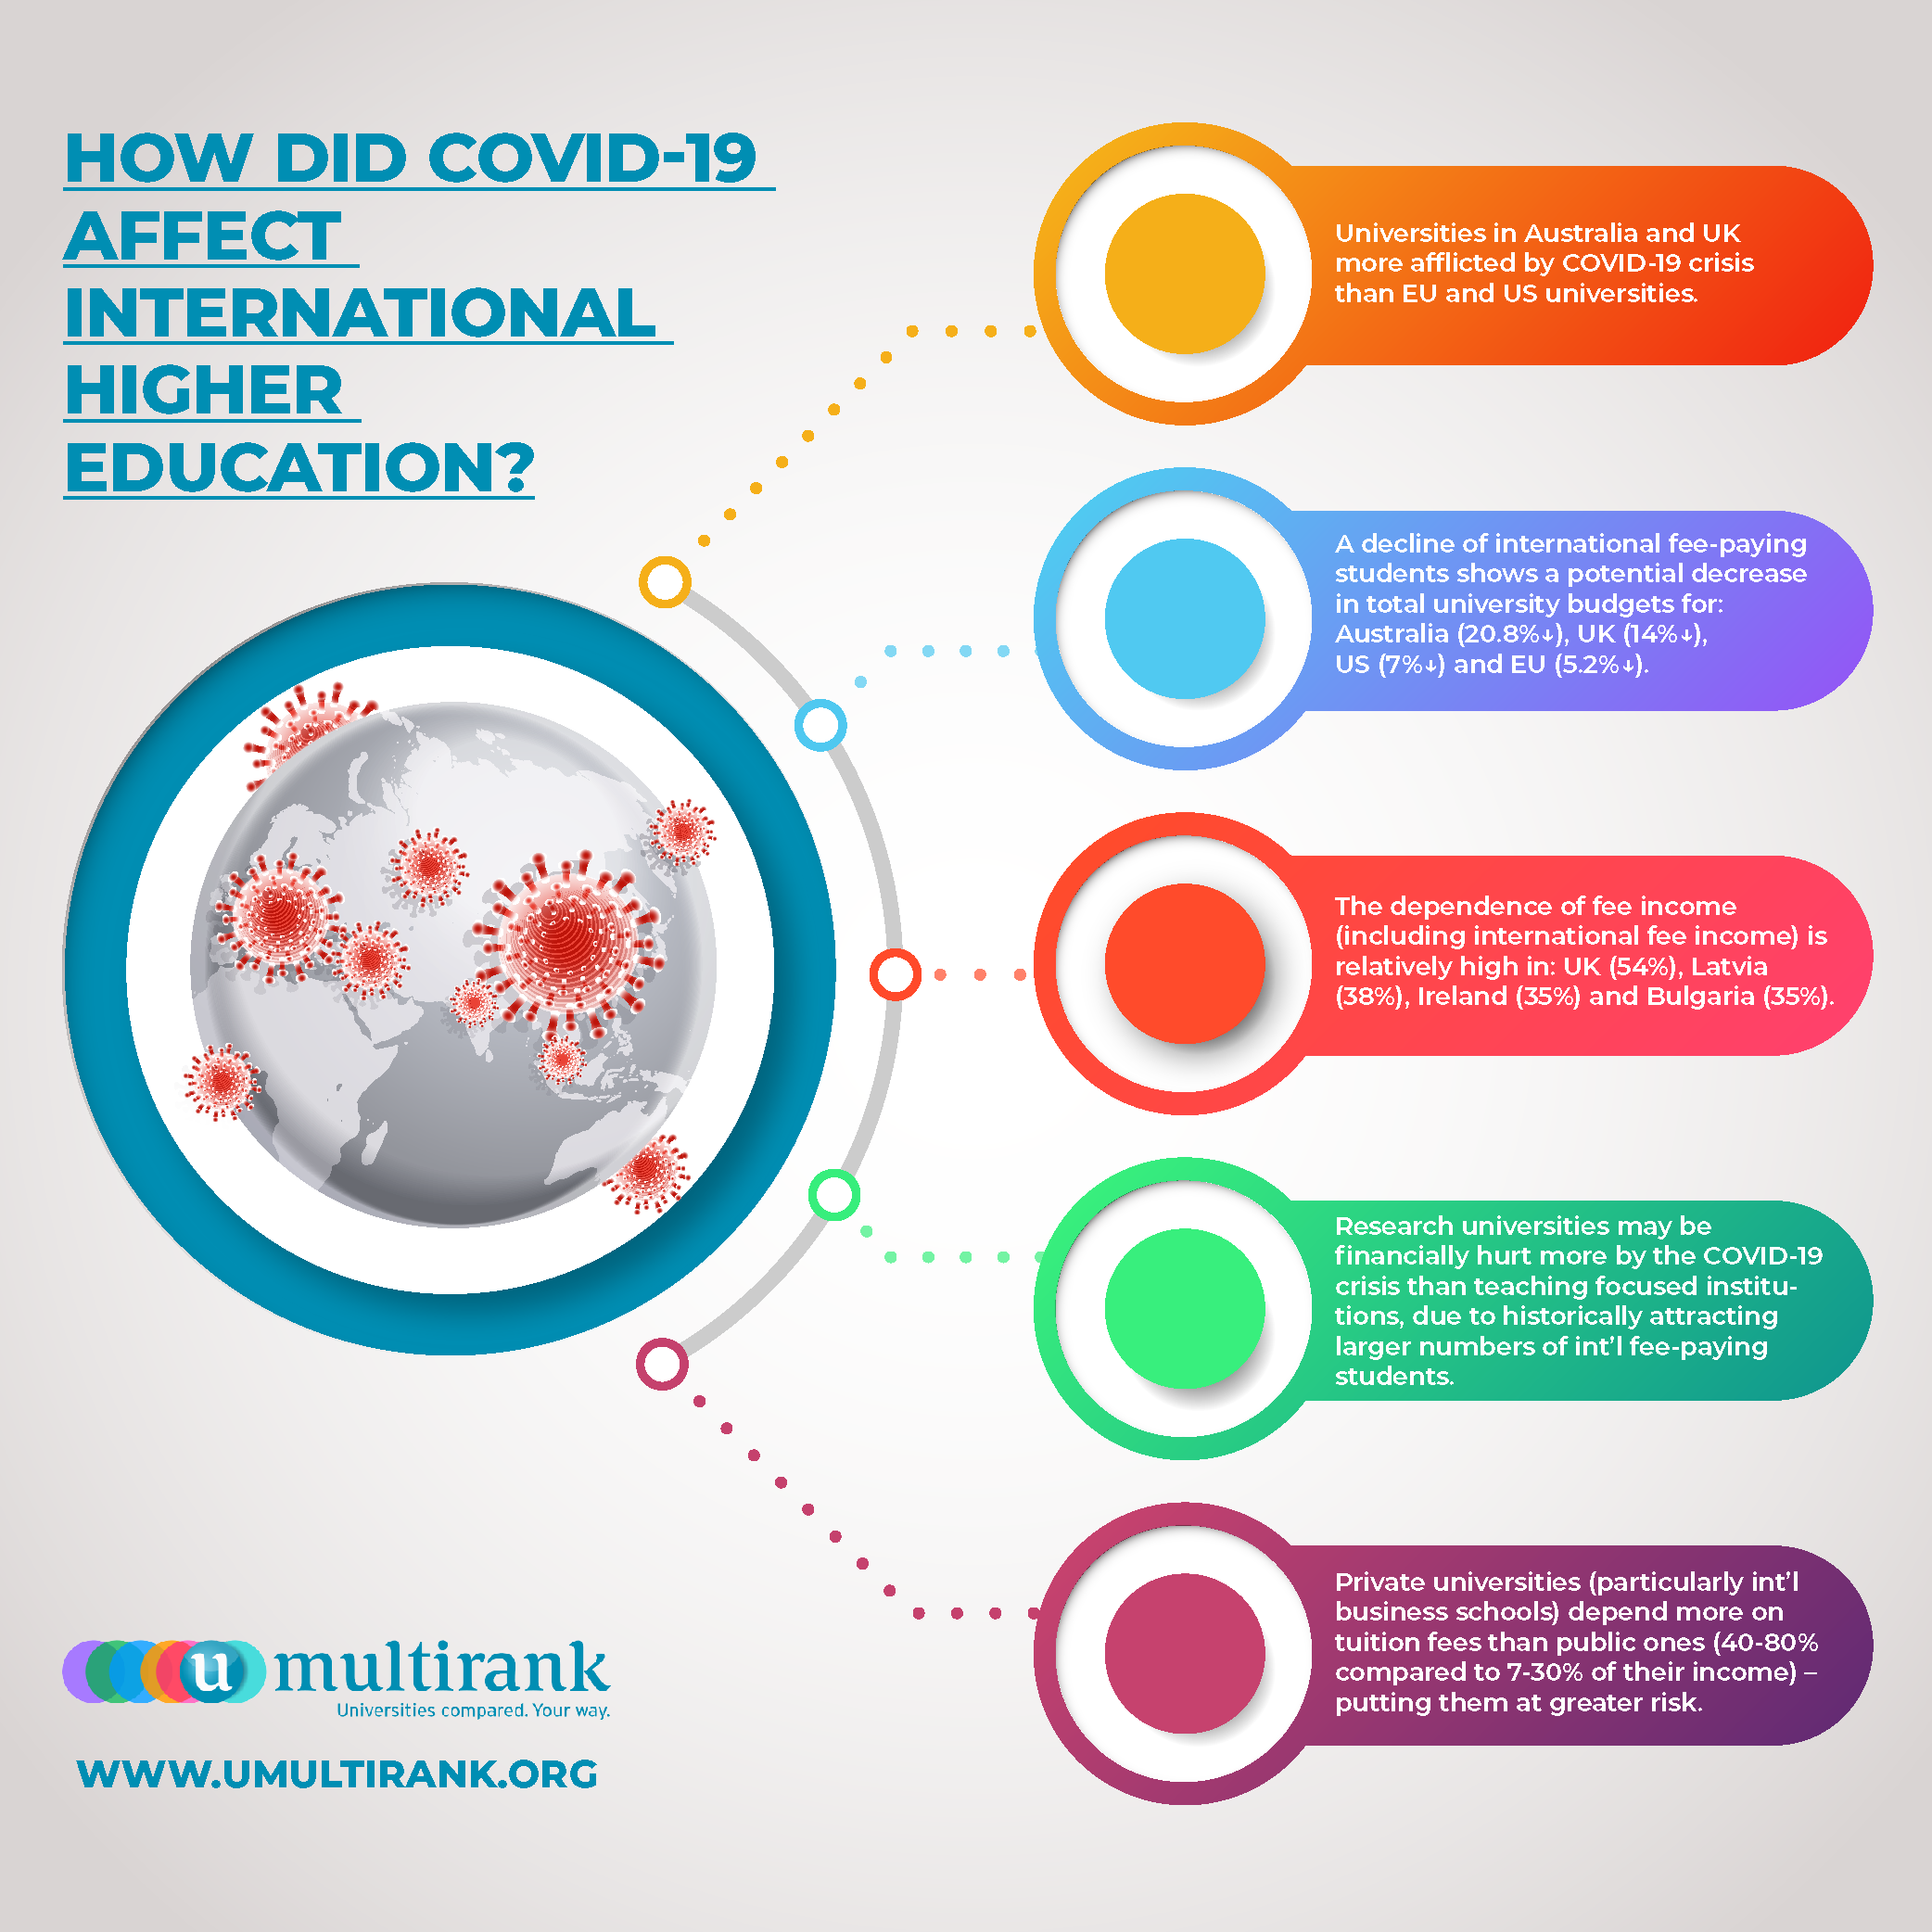 How did COVID-19 crisis affect international higher education?